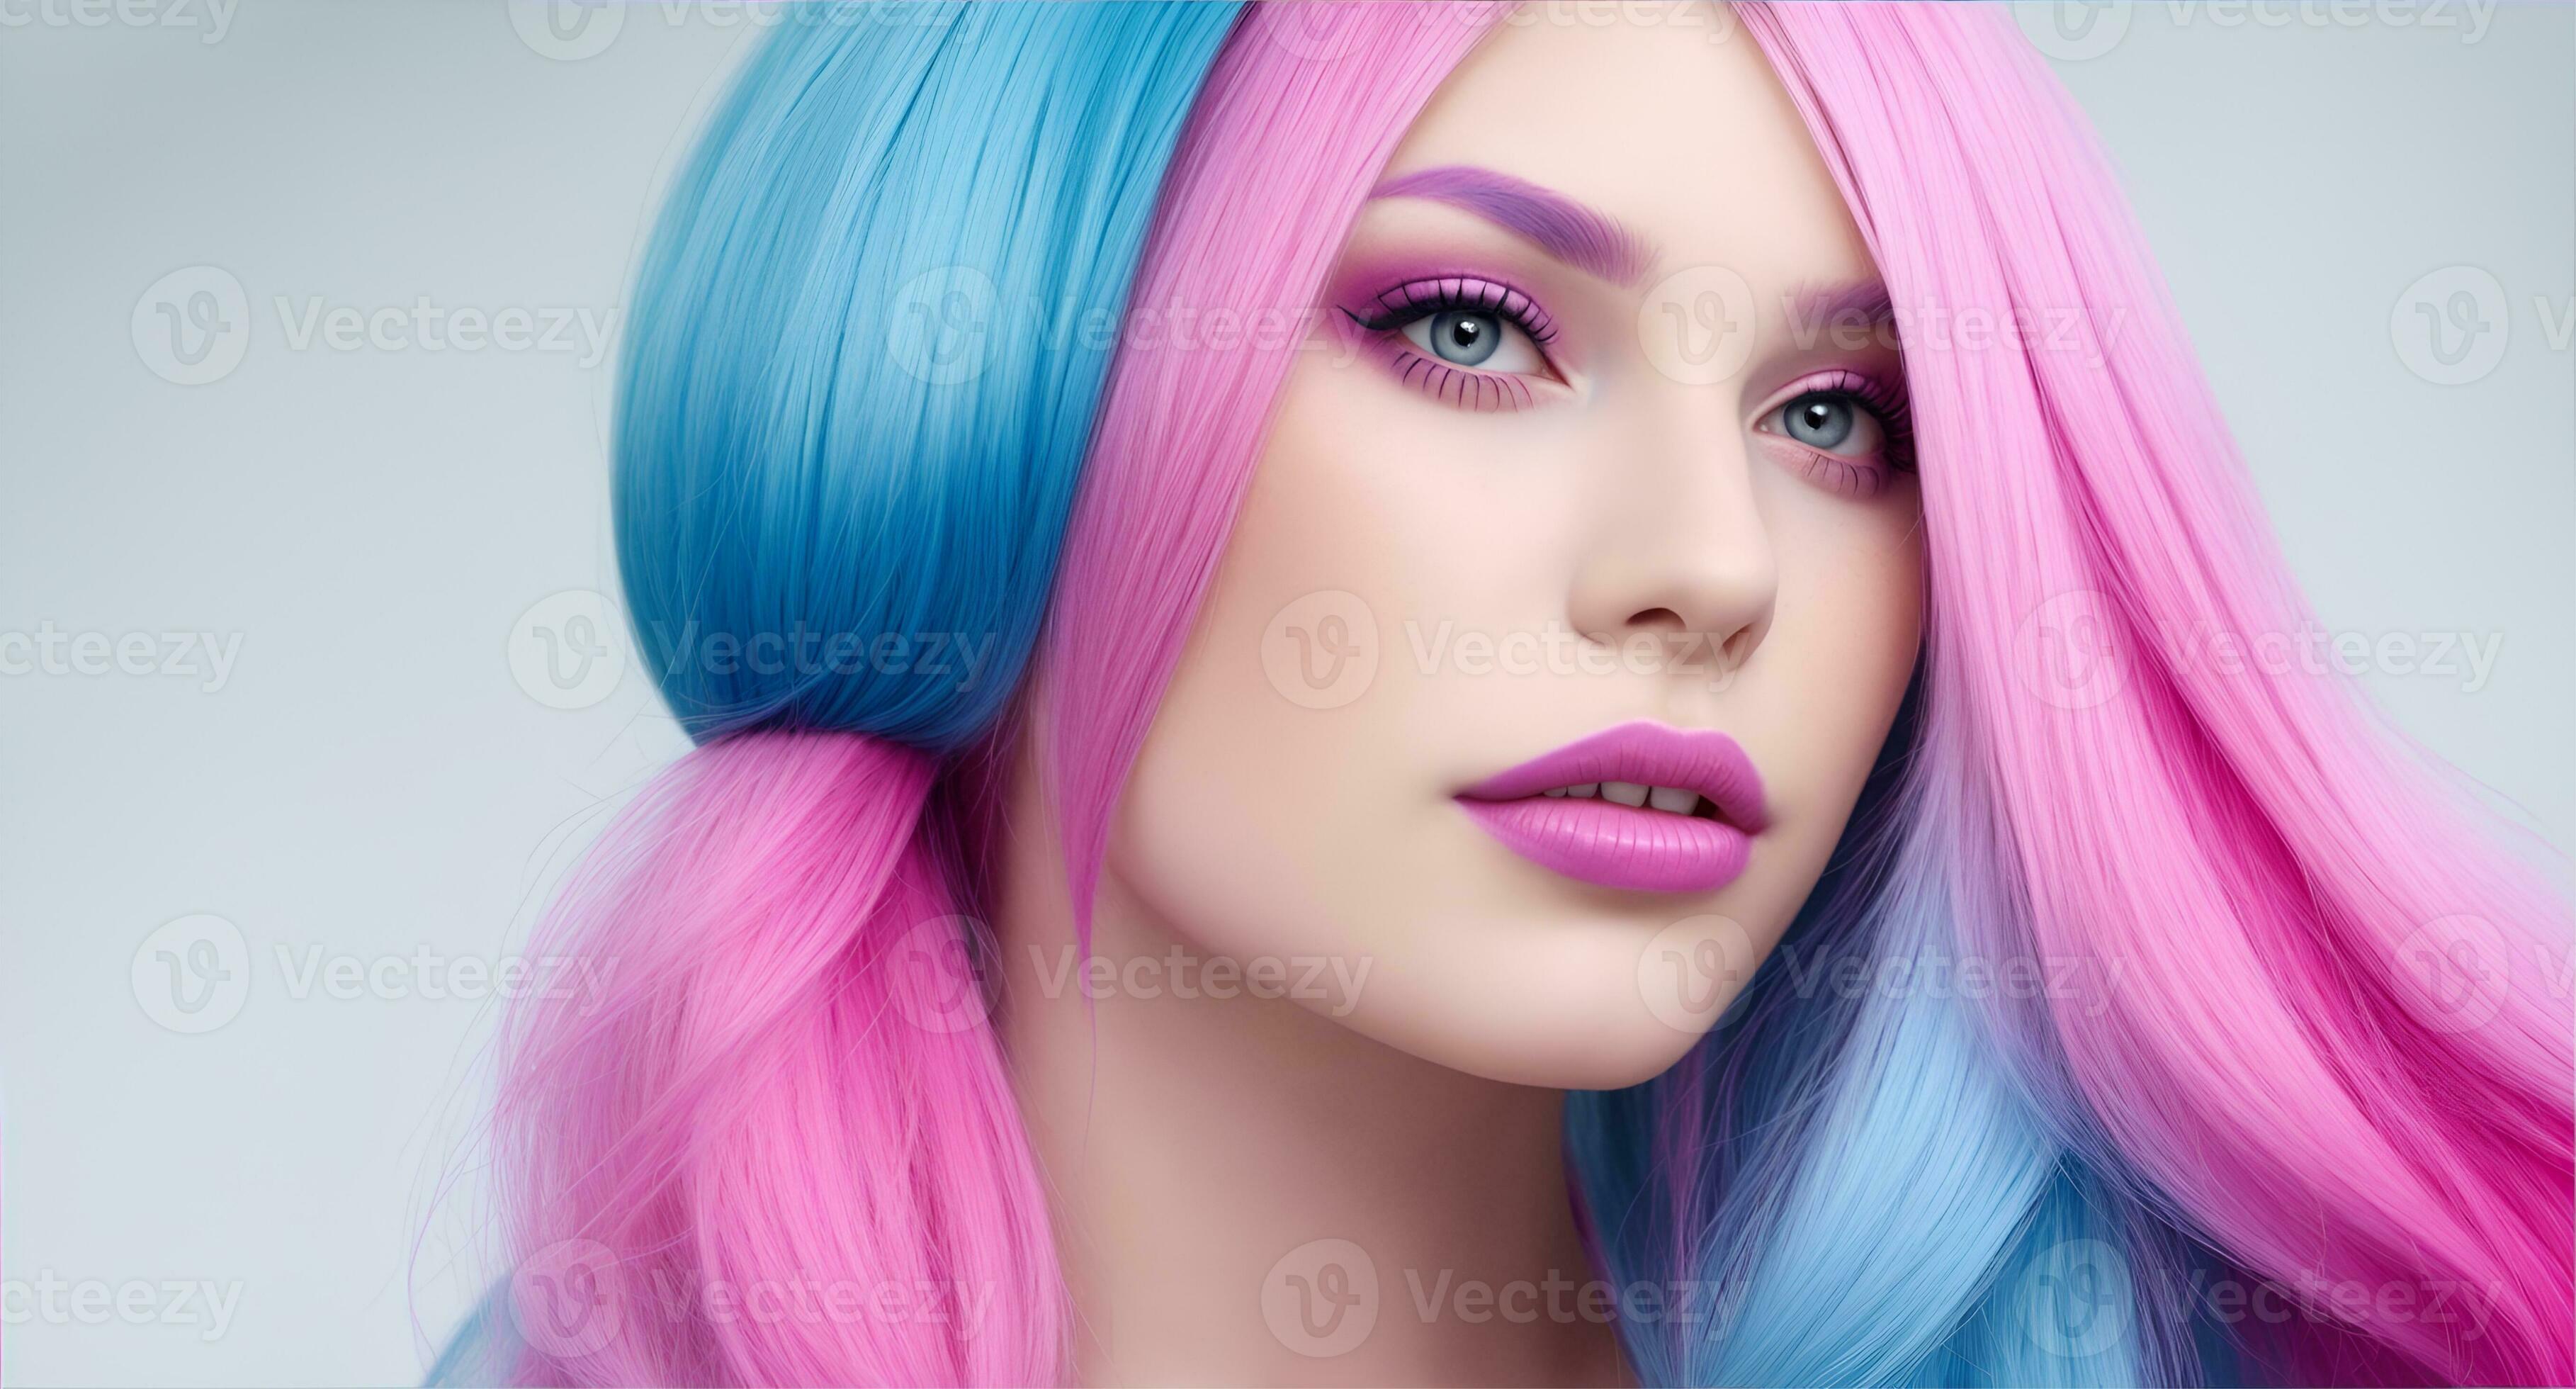 1. "How to Achieve a Stunning Pink and Blue Hair Combination" - wide 5